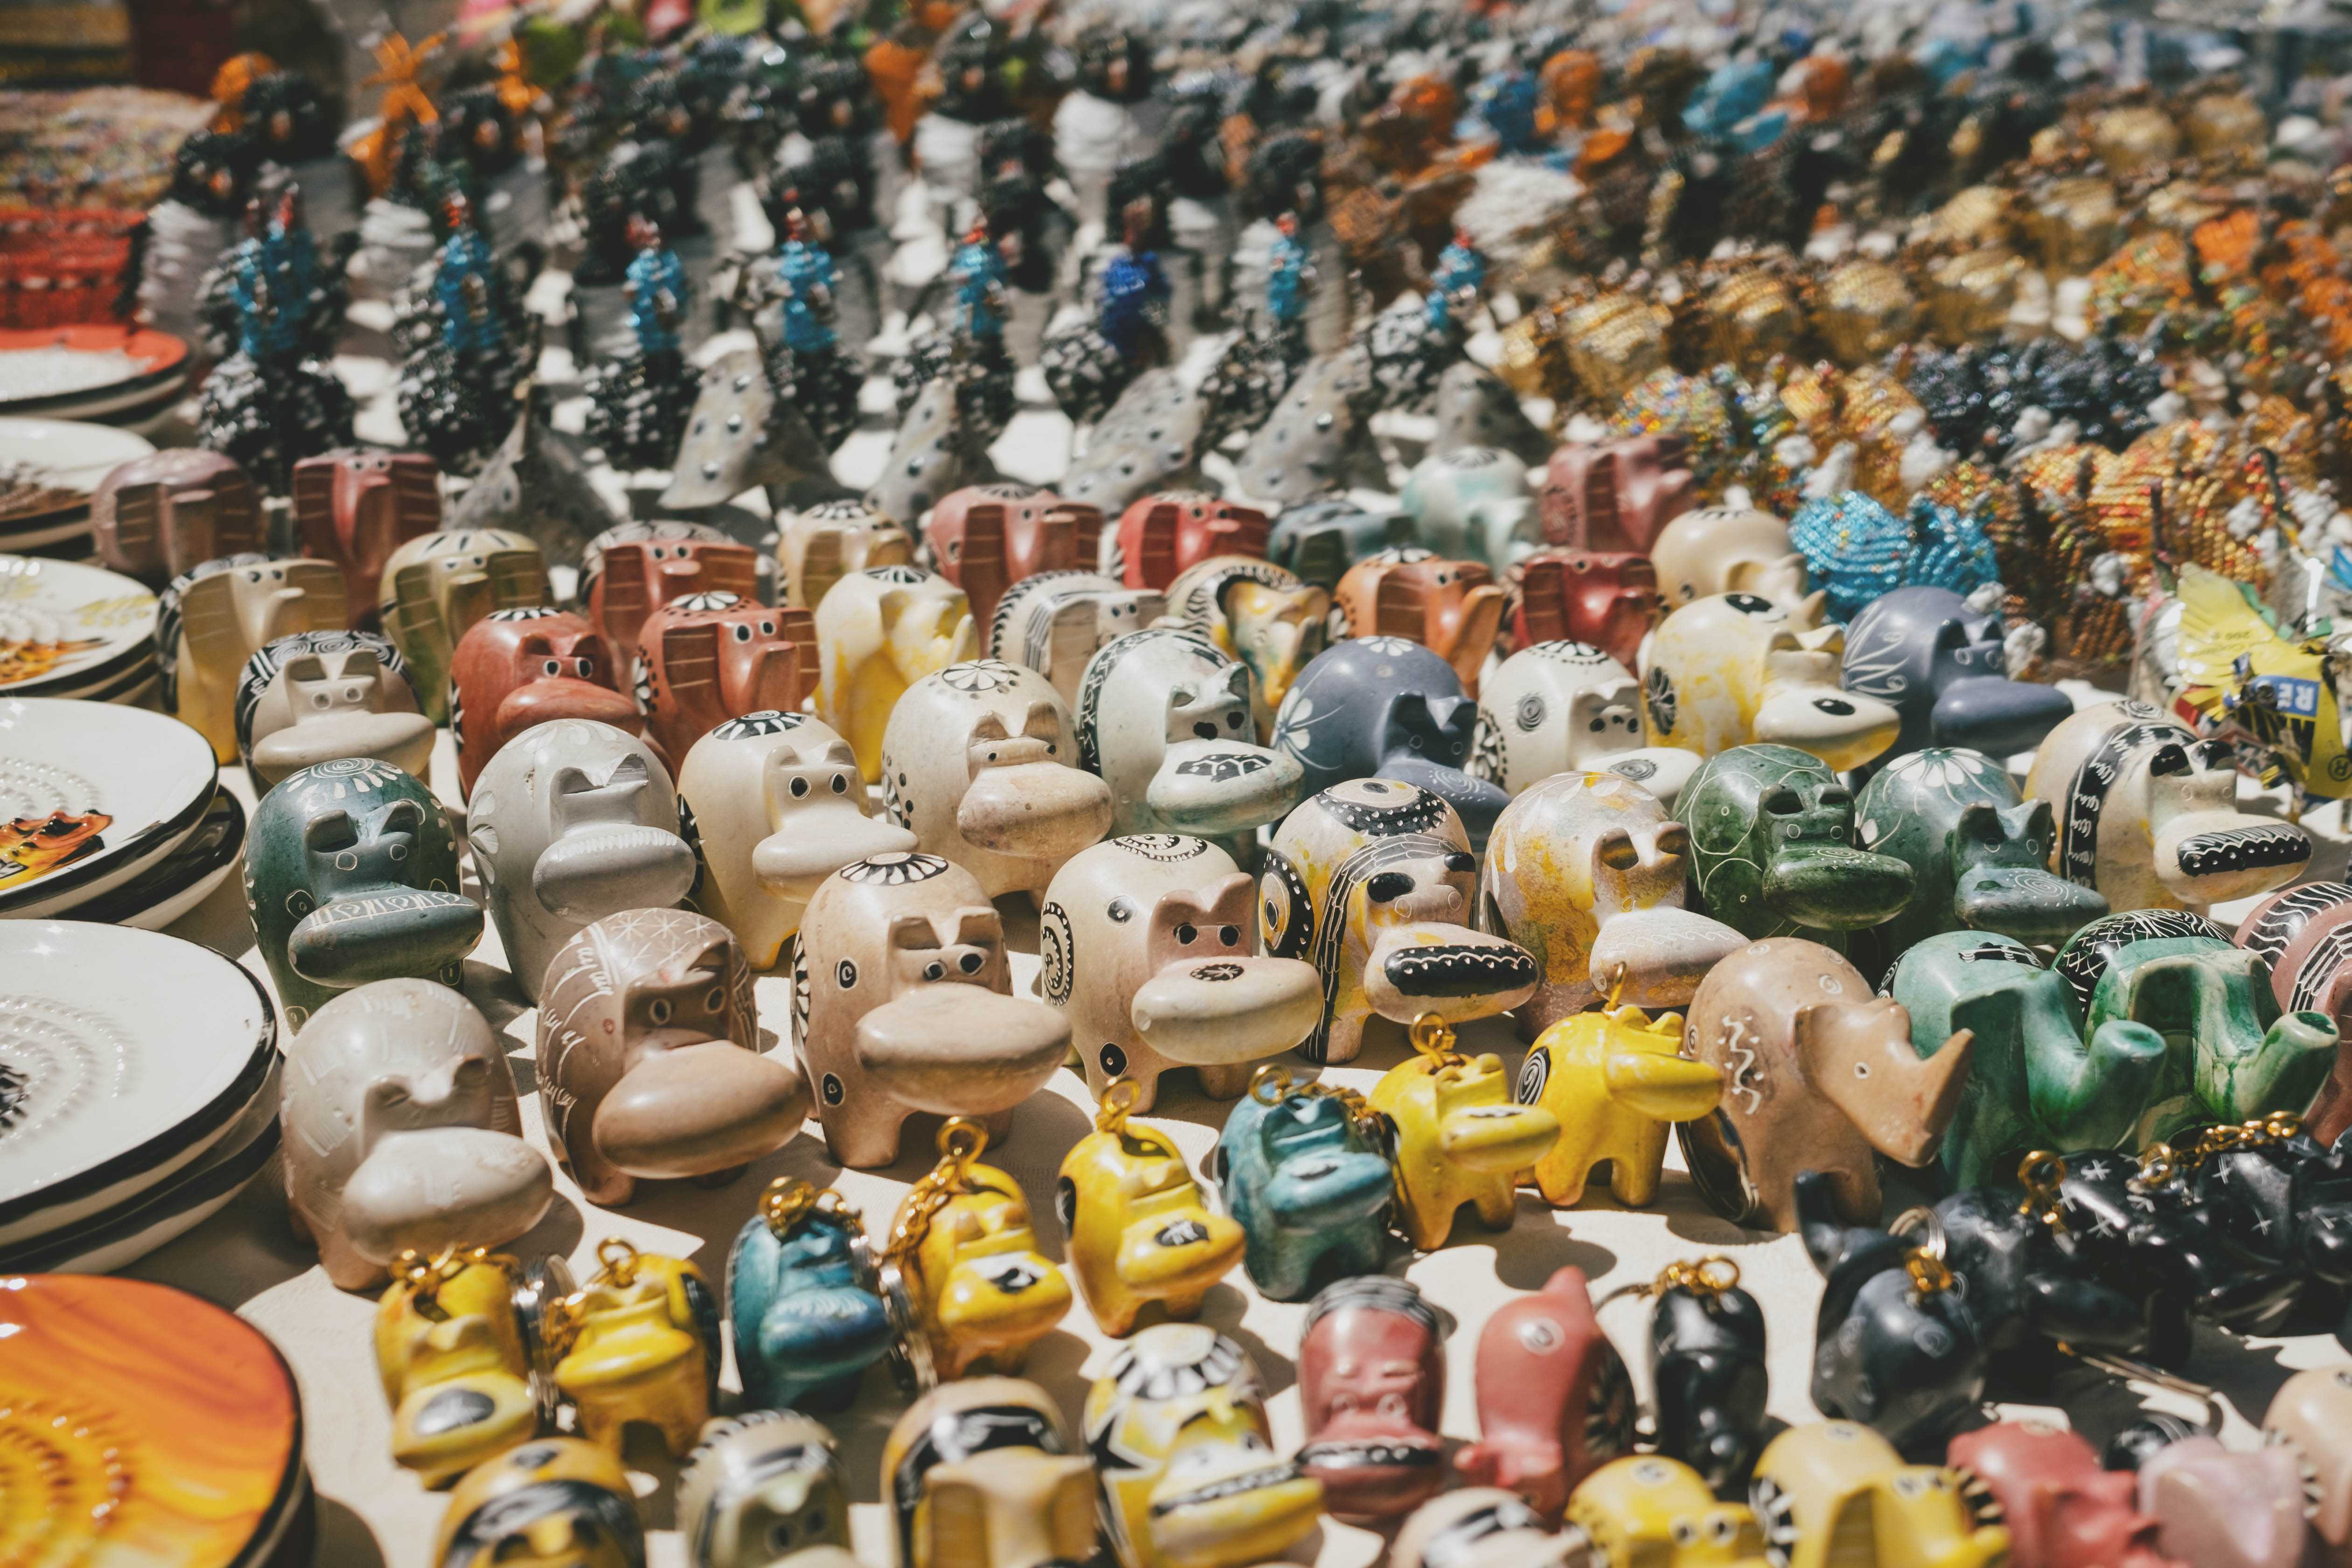 Rows of dozens of carved wooden animals for sale at a handicraft market